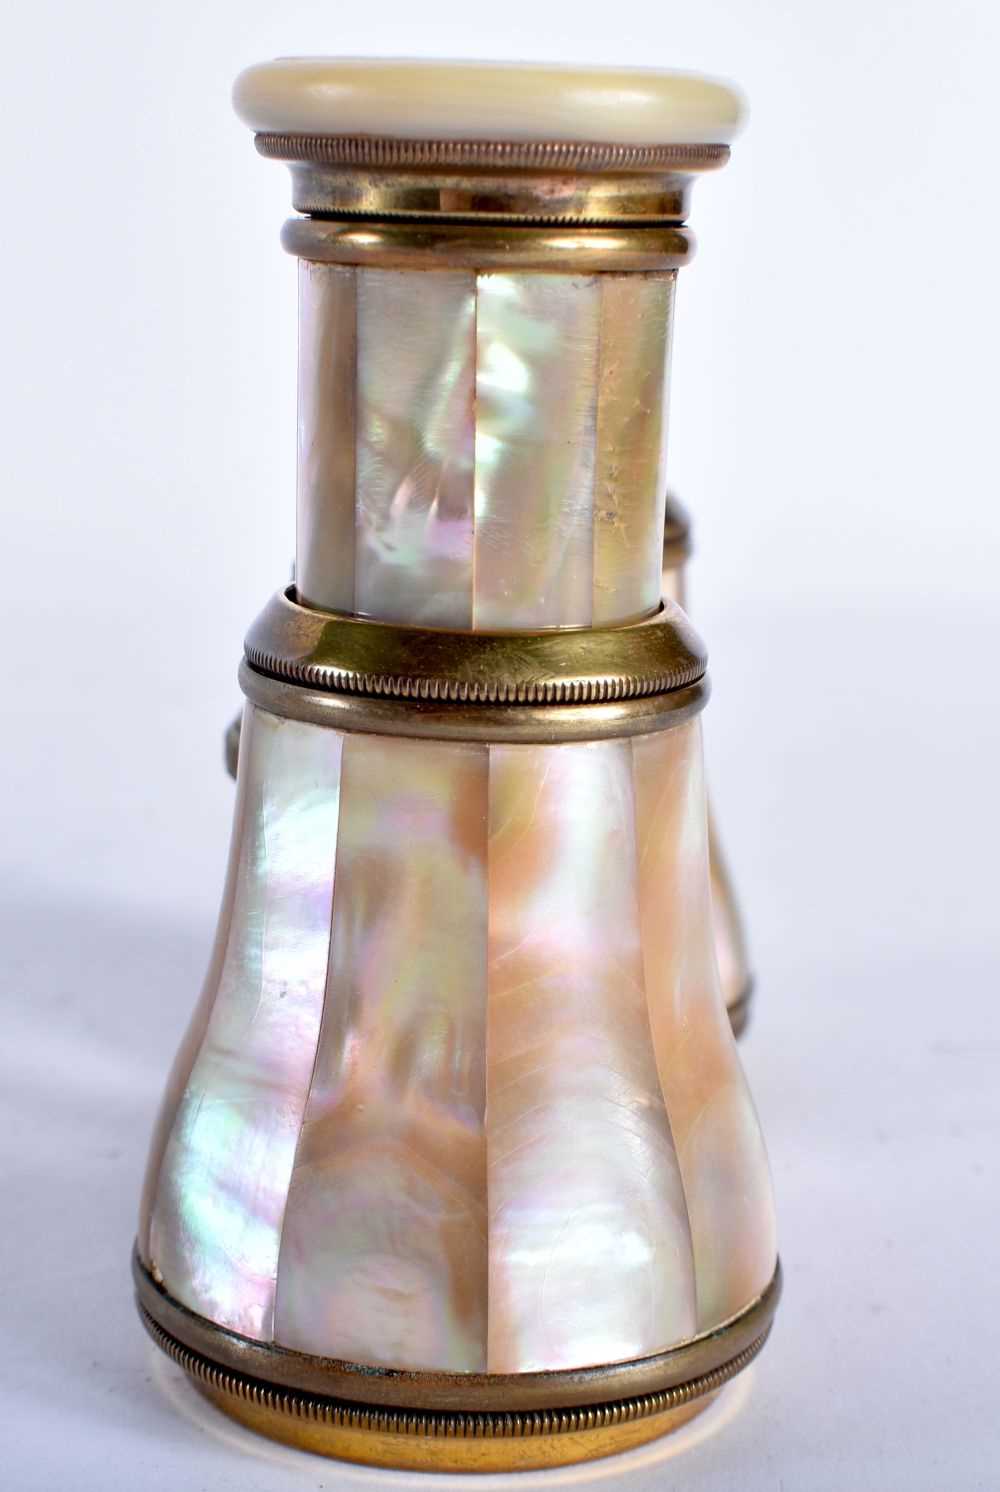 A PAIR OF MOTHER OF PEARL OPERA GLASSES. 8.5 cm x 10.5 cm extended. - Image 2 of 5